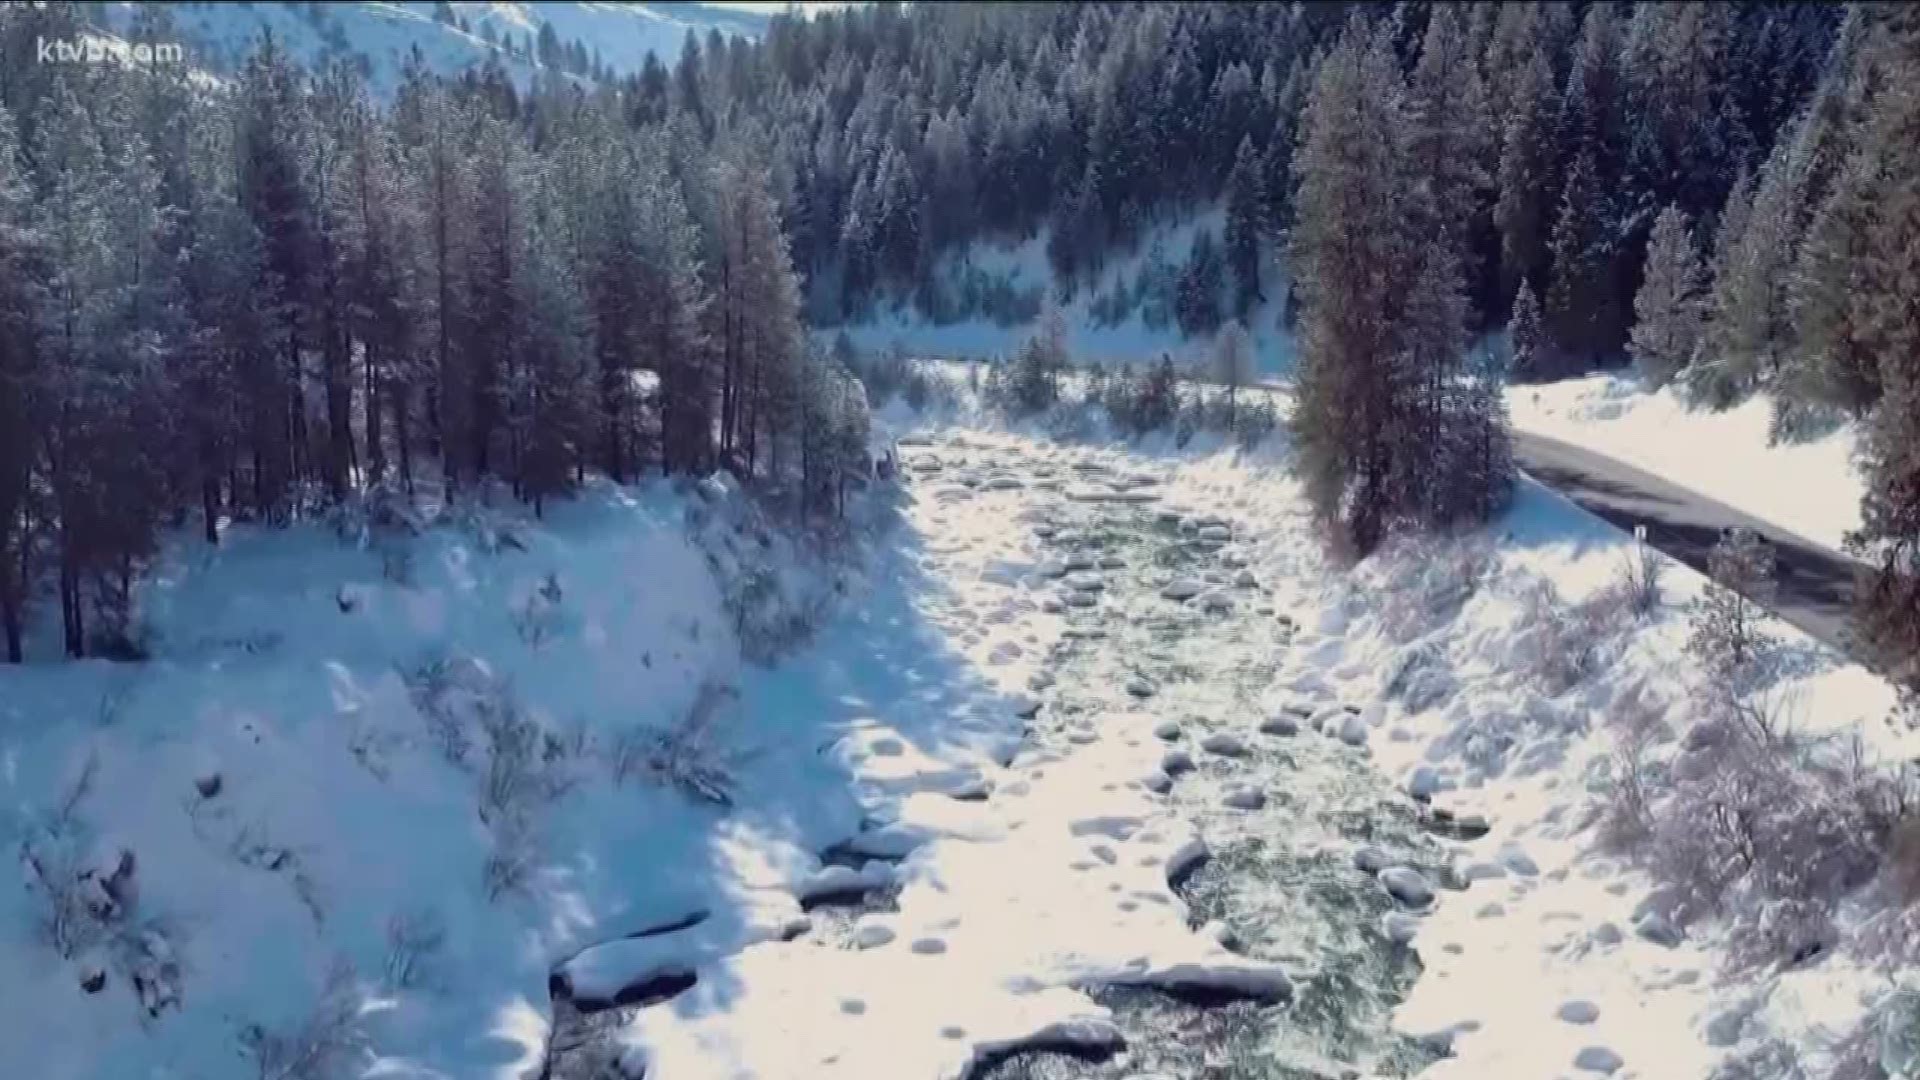 Spring runoff season is nearly here, bringing threat of flooding to